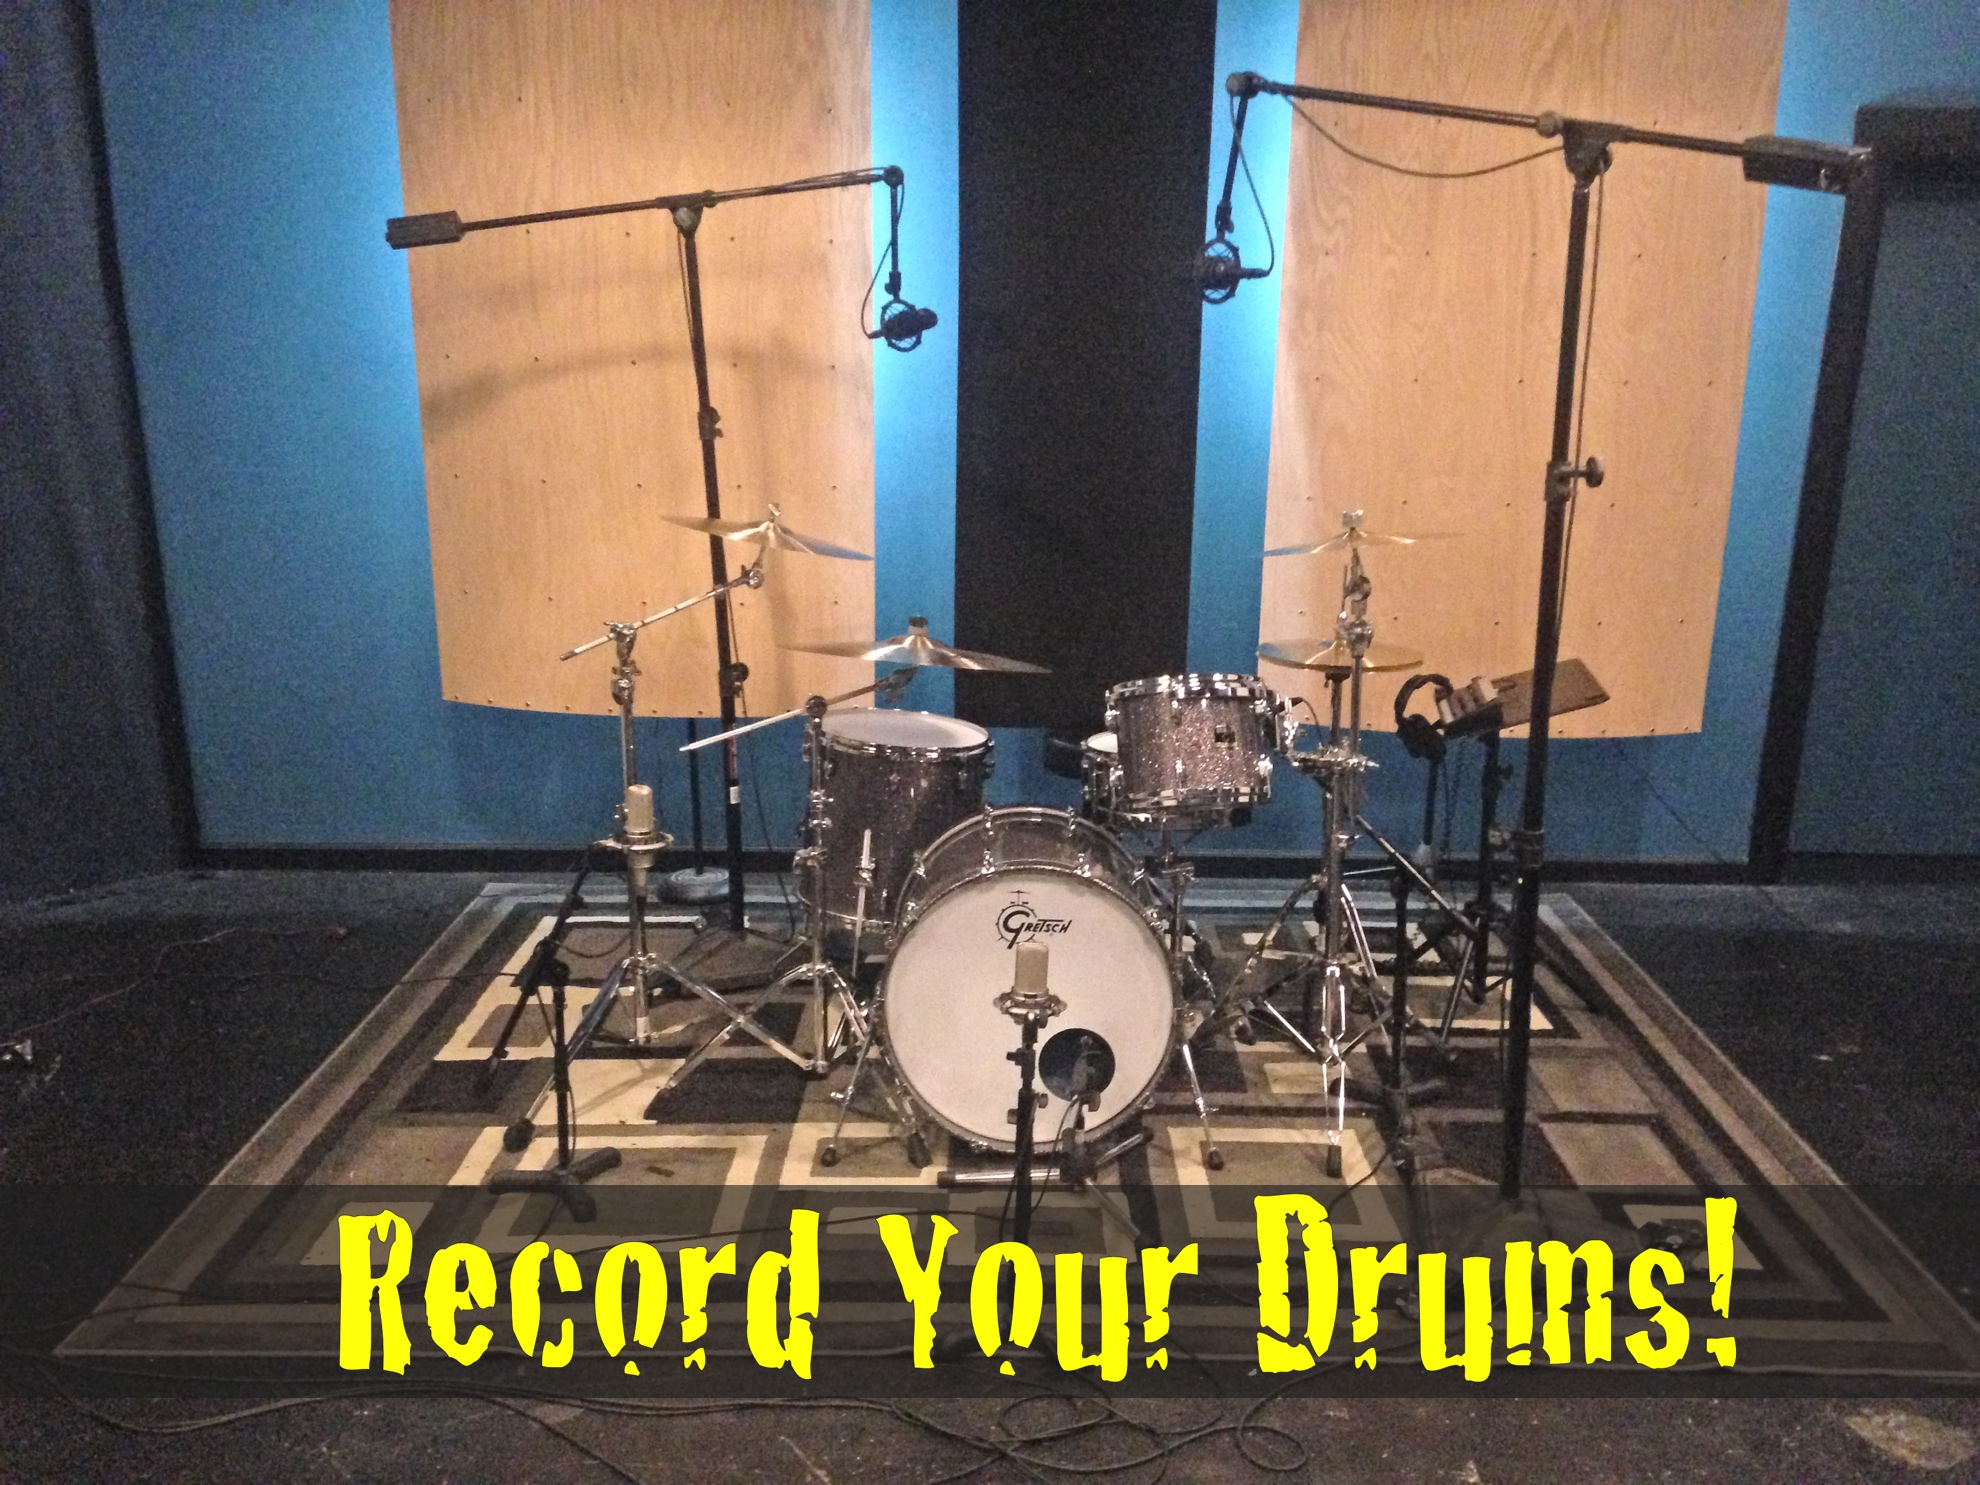 Record your drums at Ultimate Studios, Inc